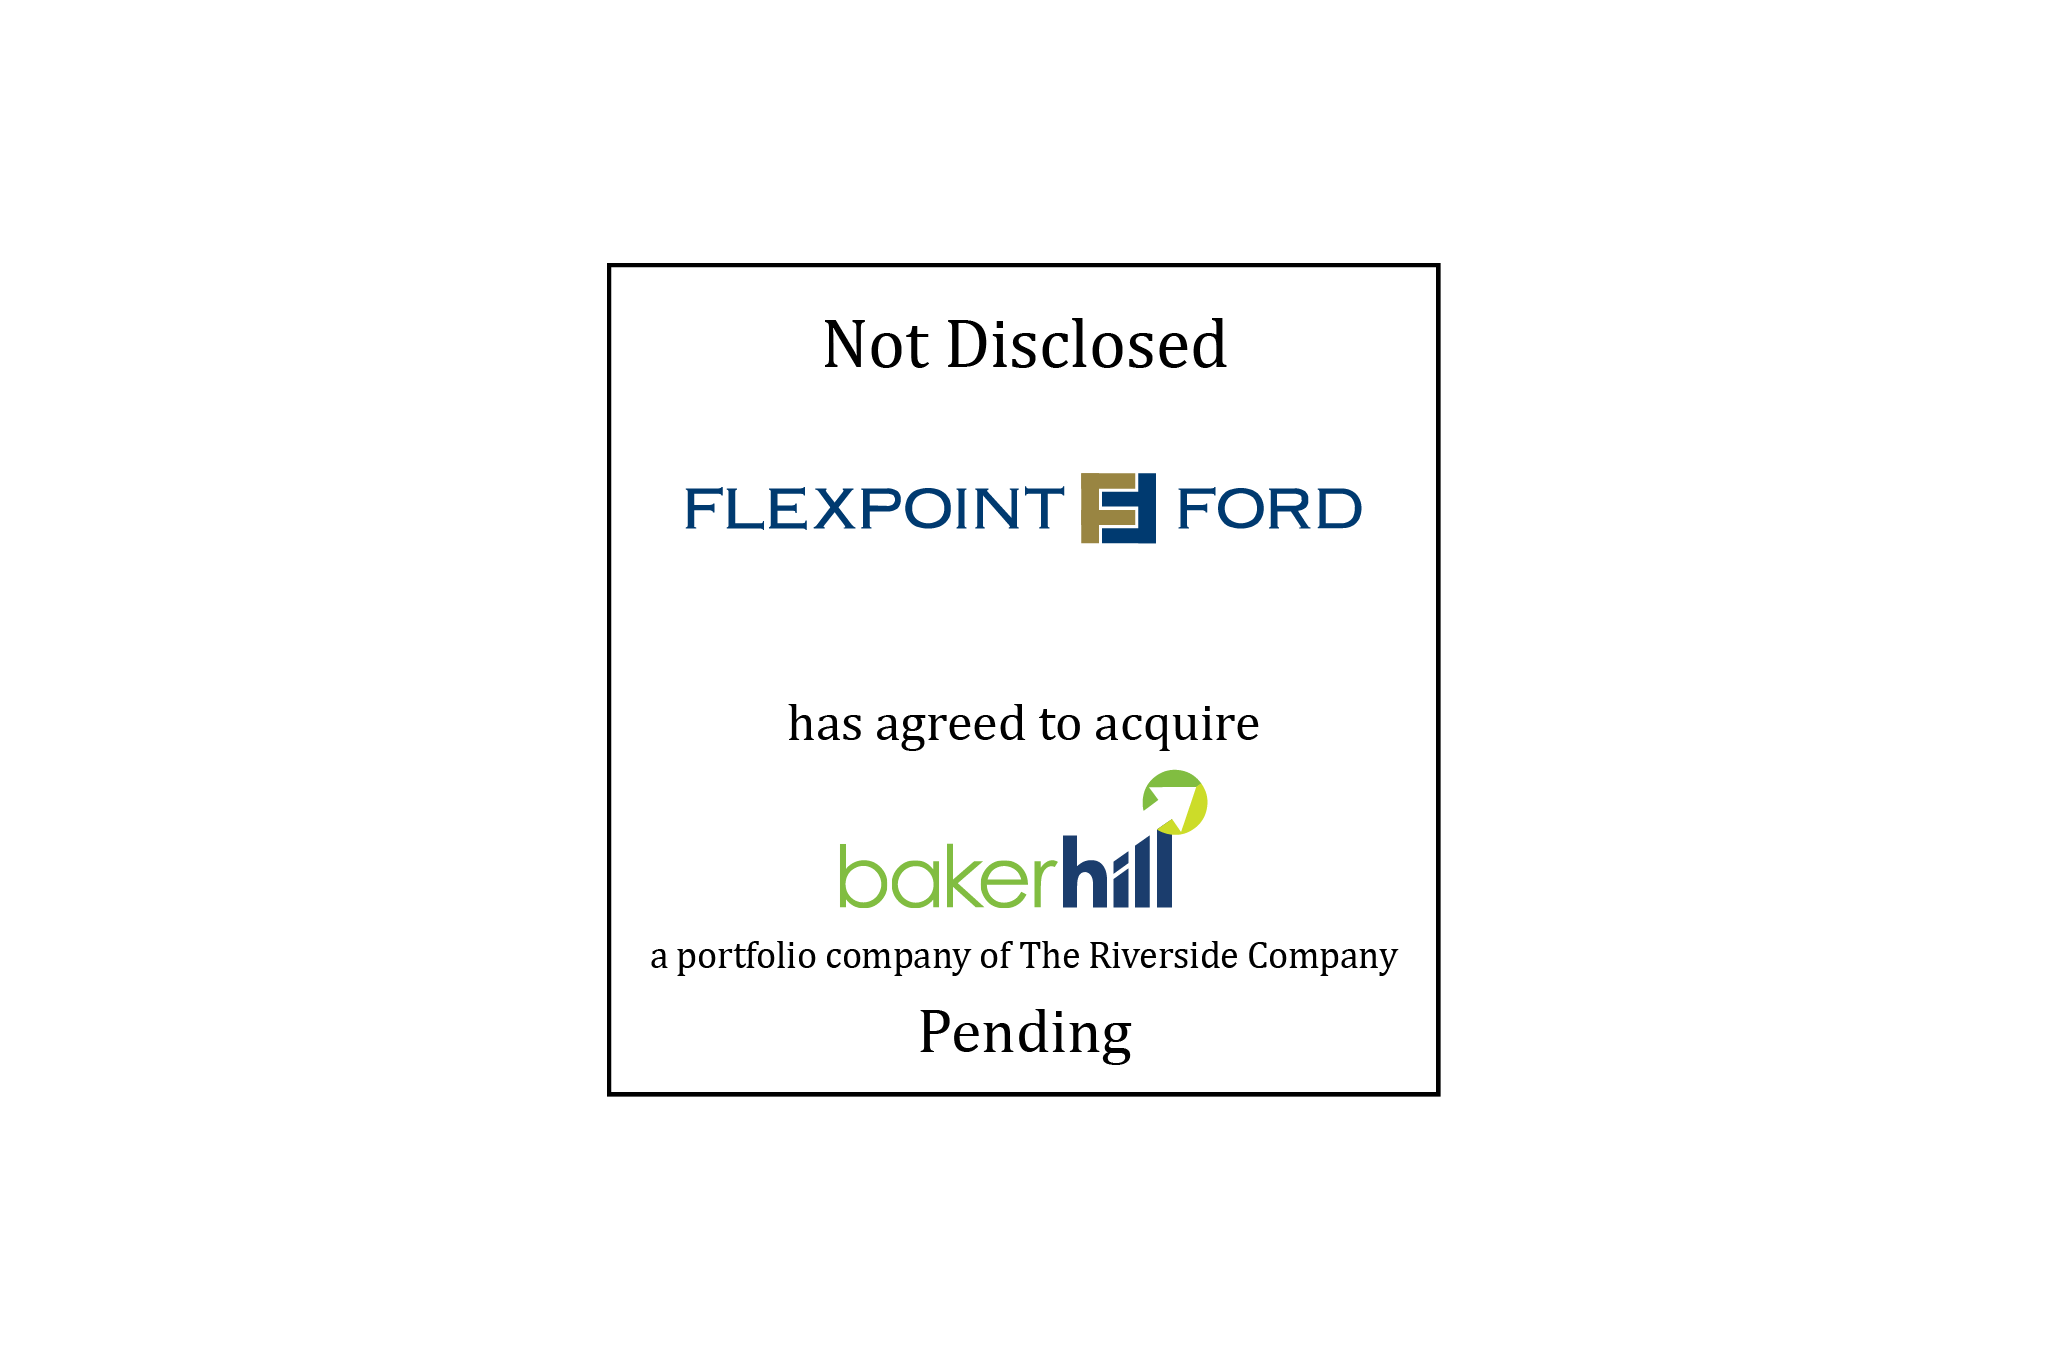 Not Disclosed | Flexpoint Ford (logo) has agreed to acquire Baker Hill (logo) | Pending